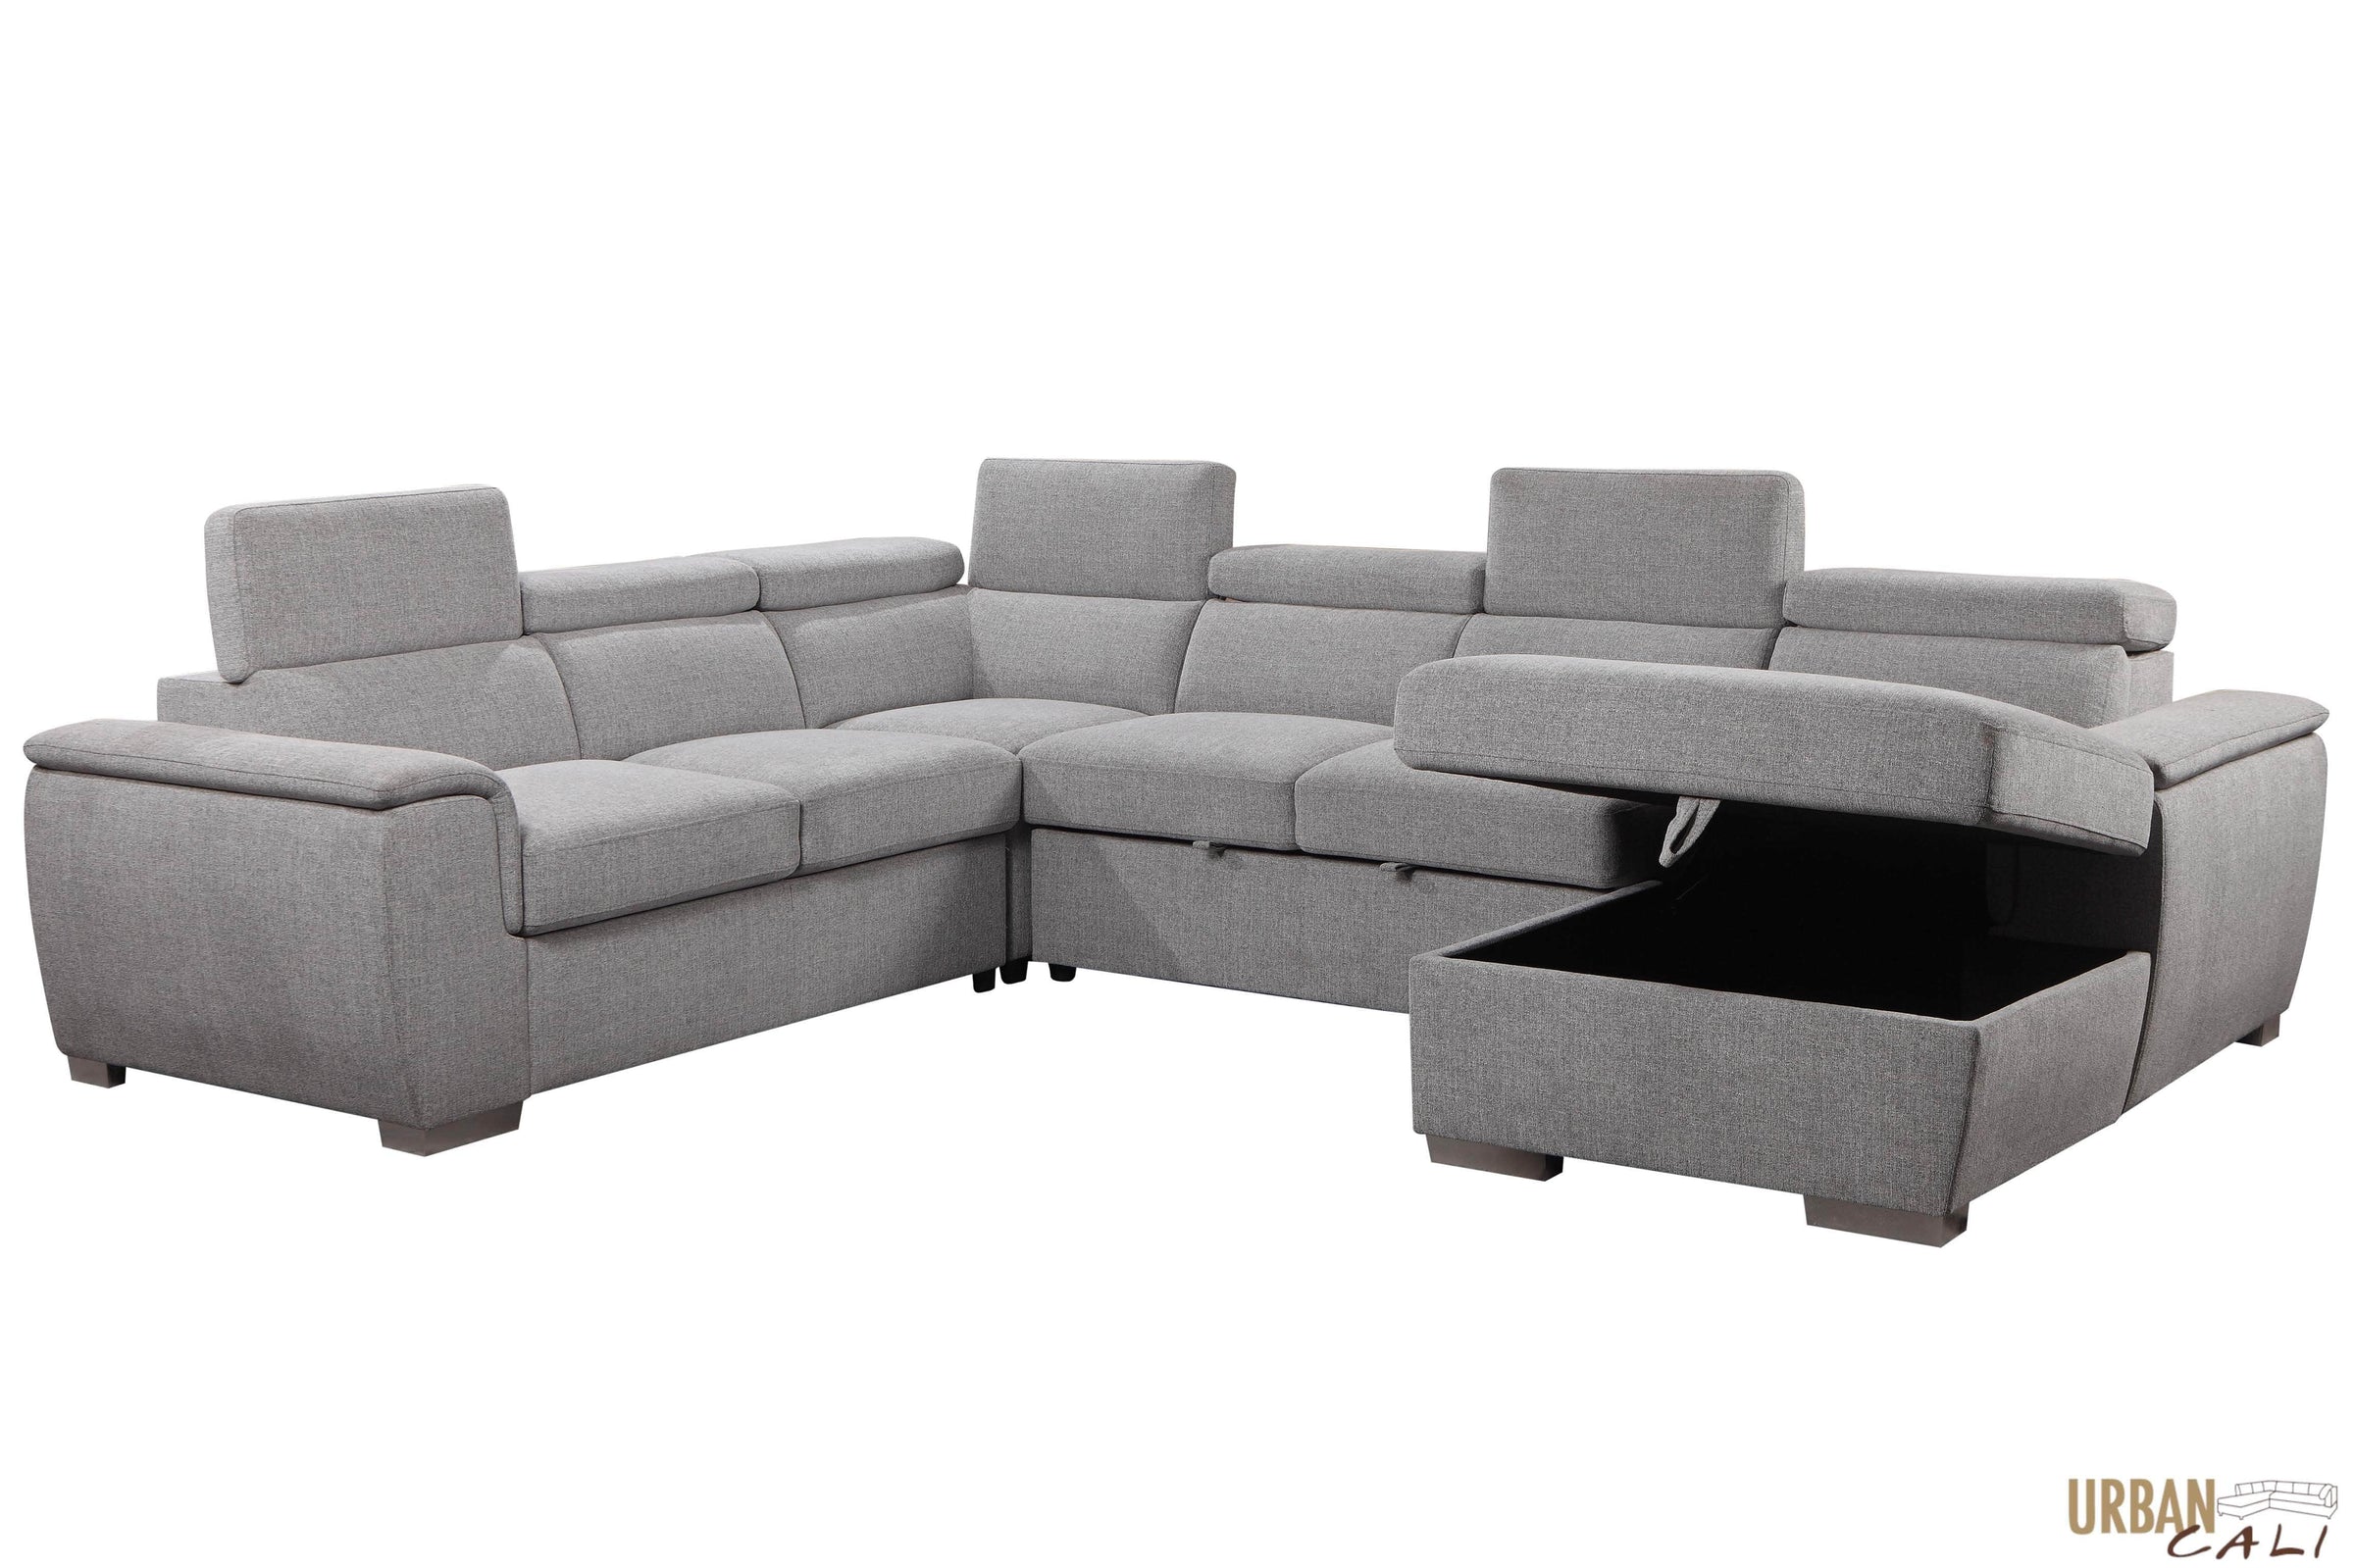 bel air large sectional sofa bed